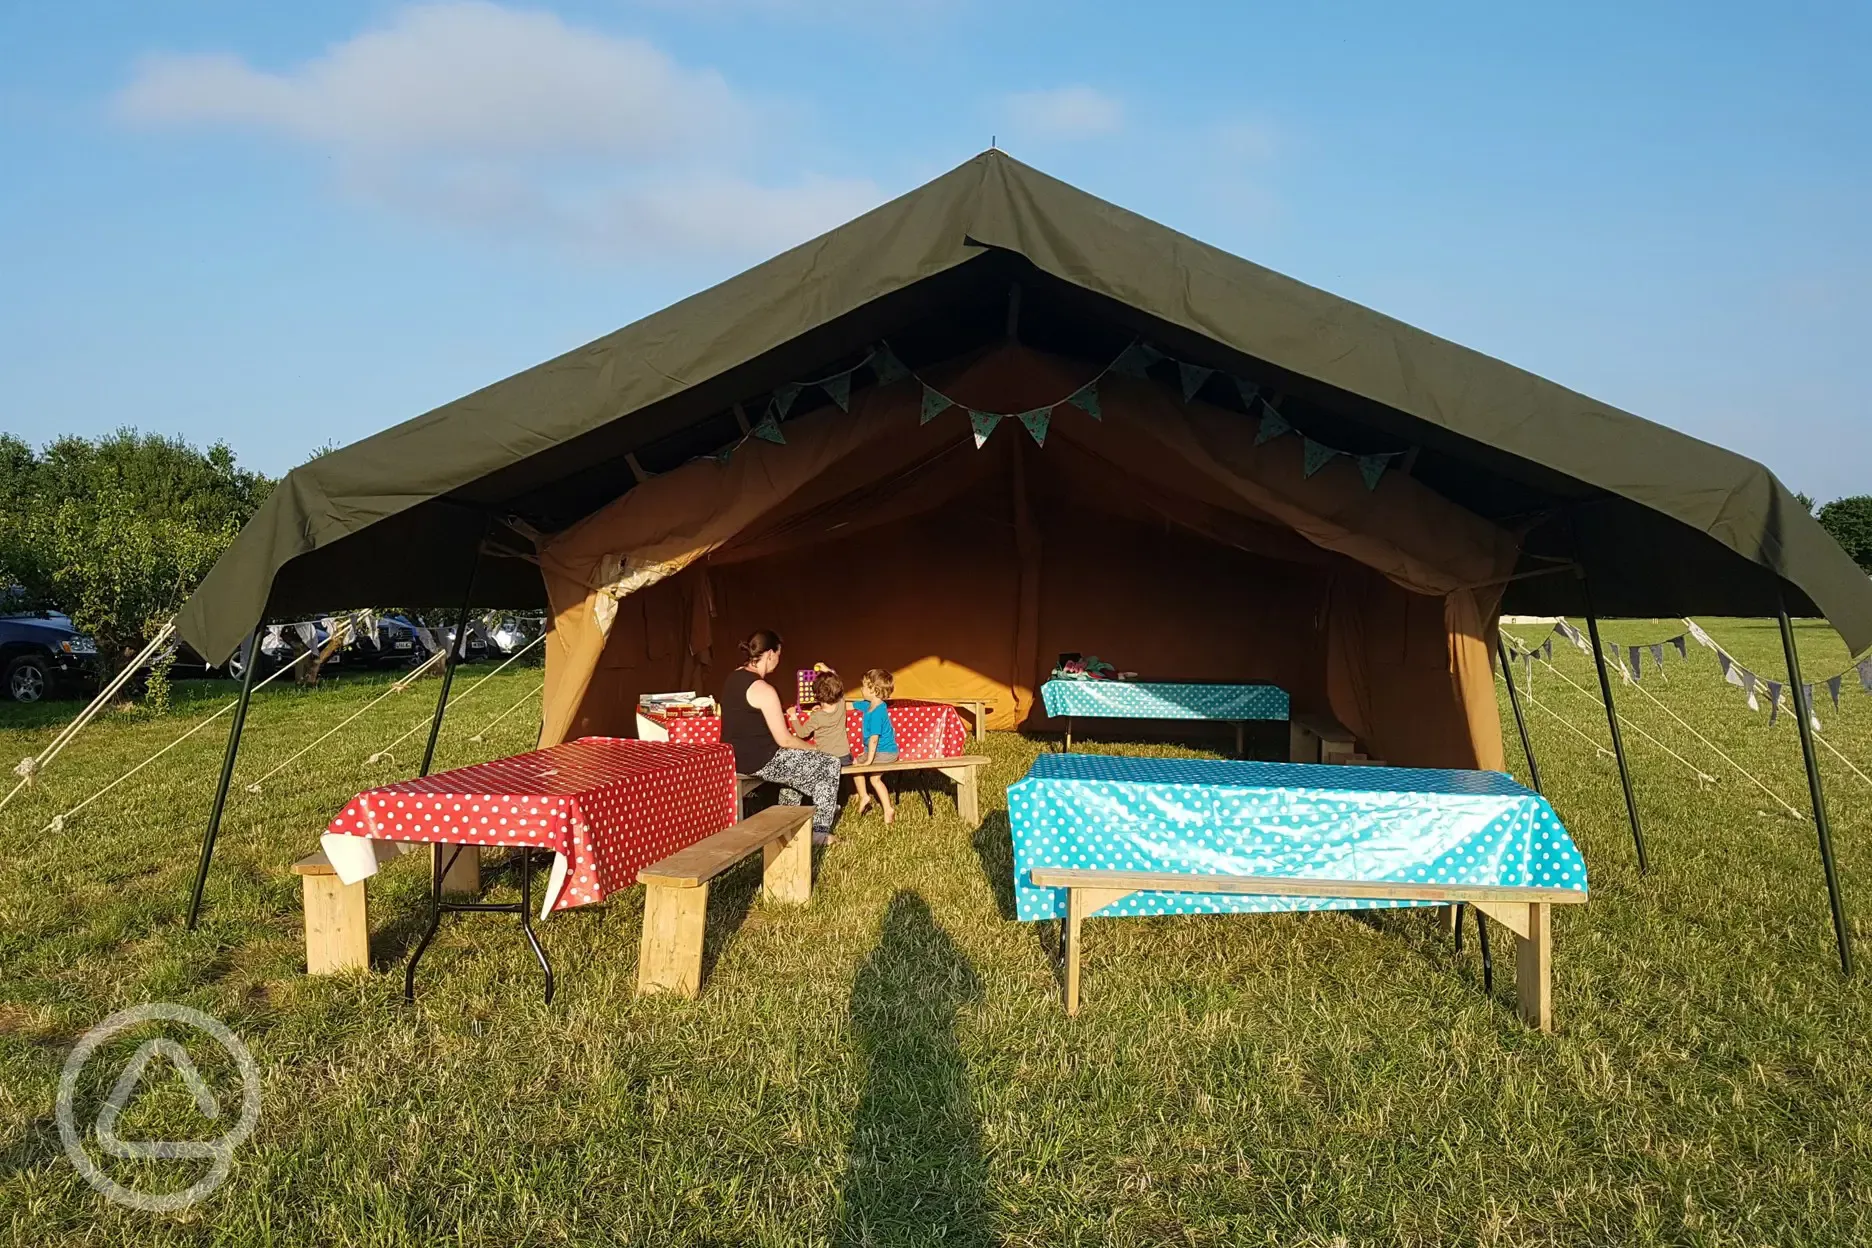 Retreat tent with activities for kids and cinema on Saturday